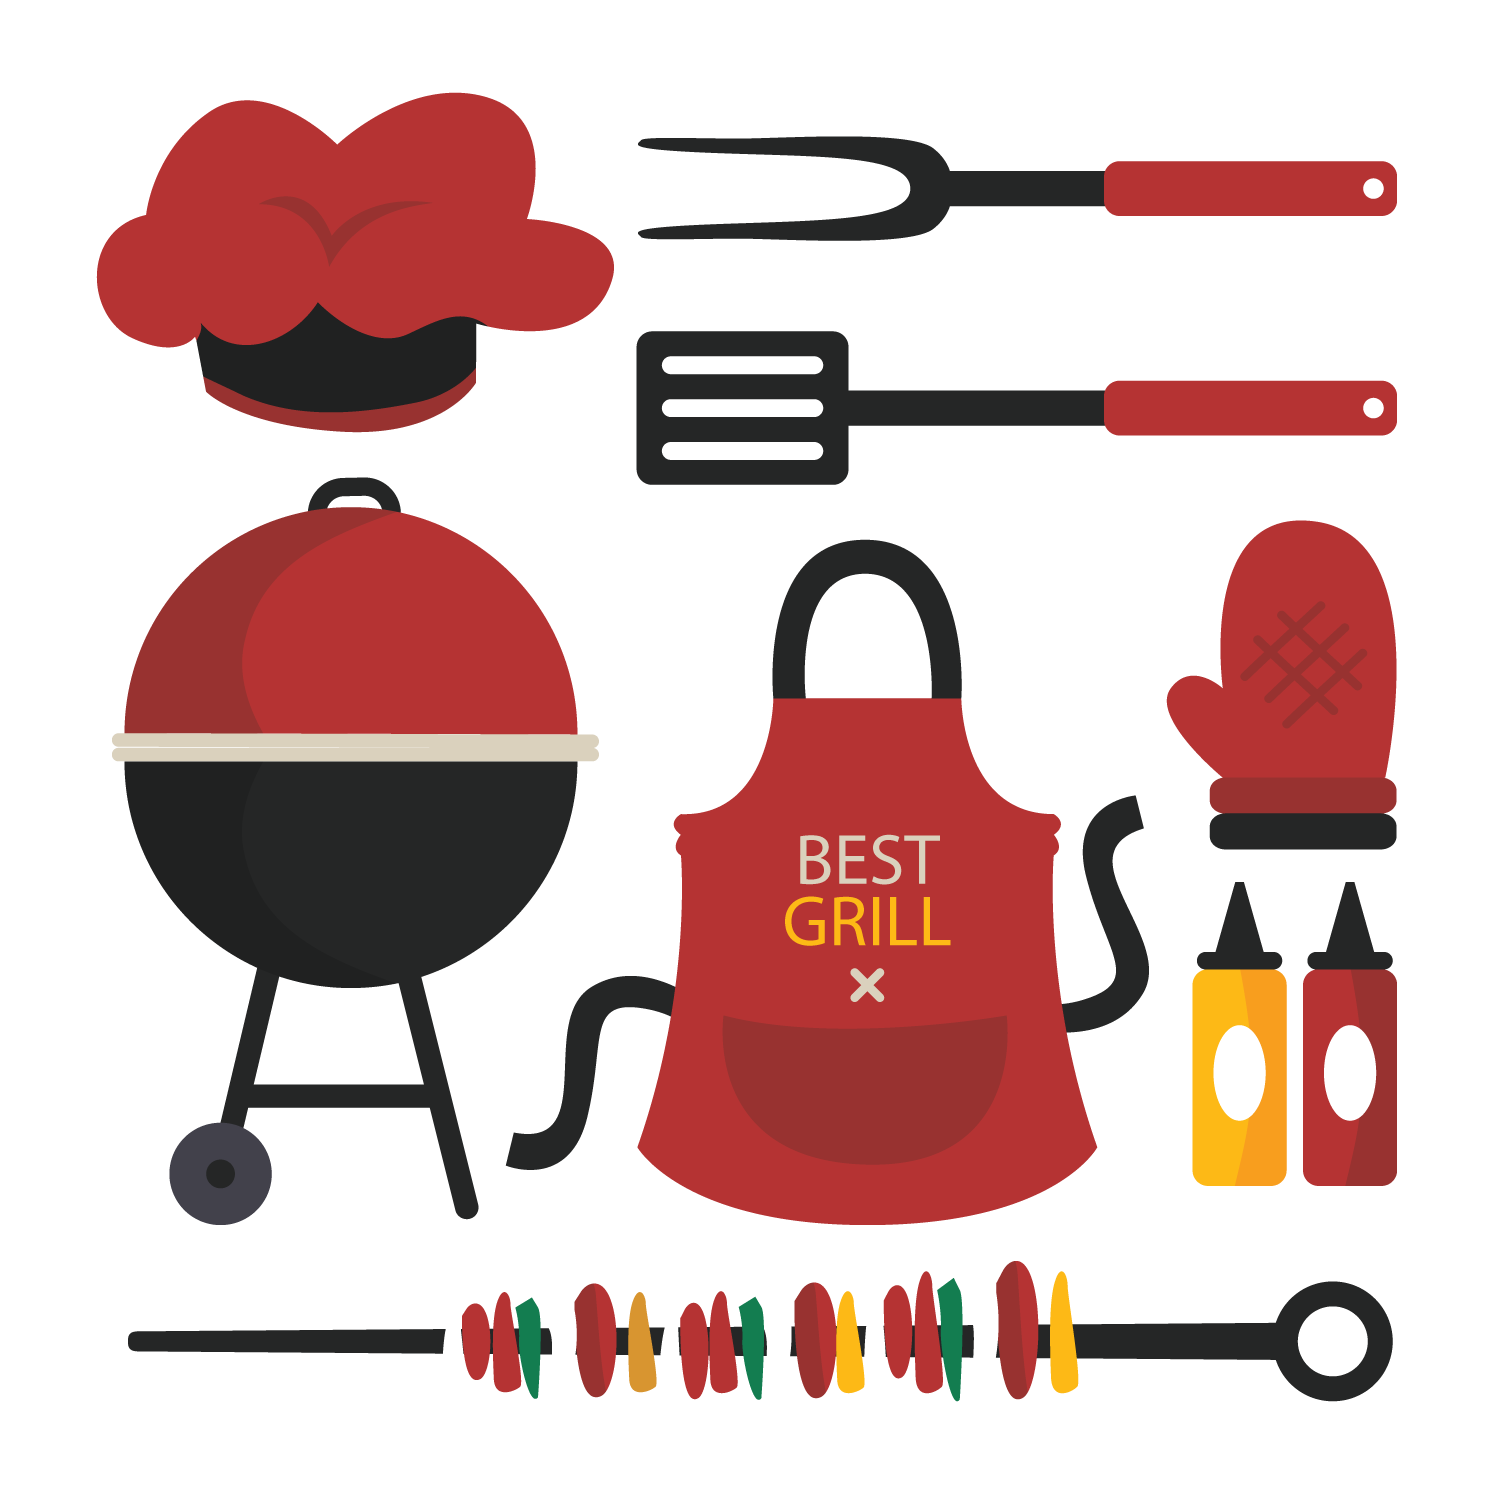 Barbecue Picnic Food Illustration Red Barbecue Vector Png Download